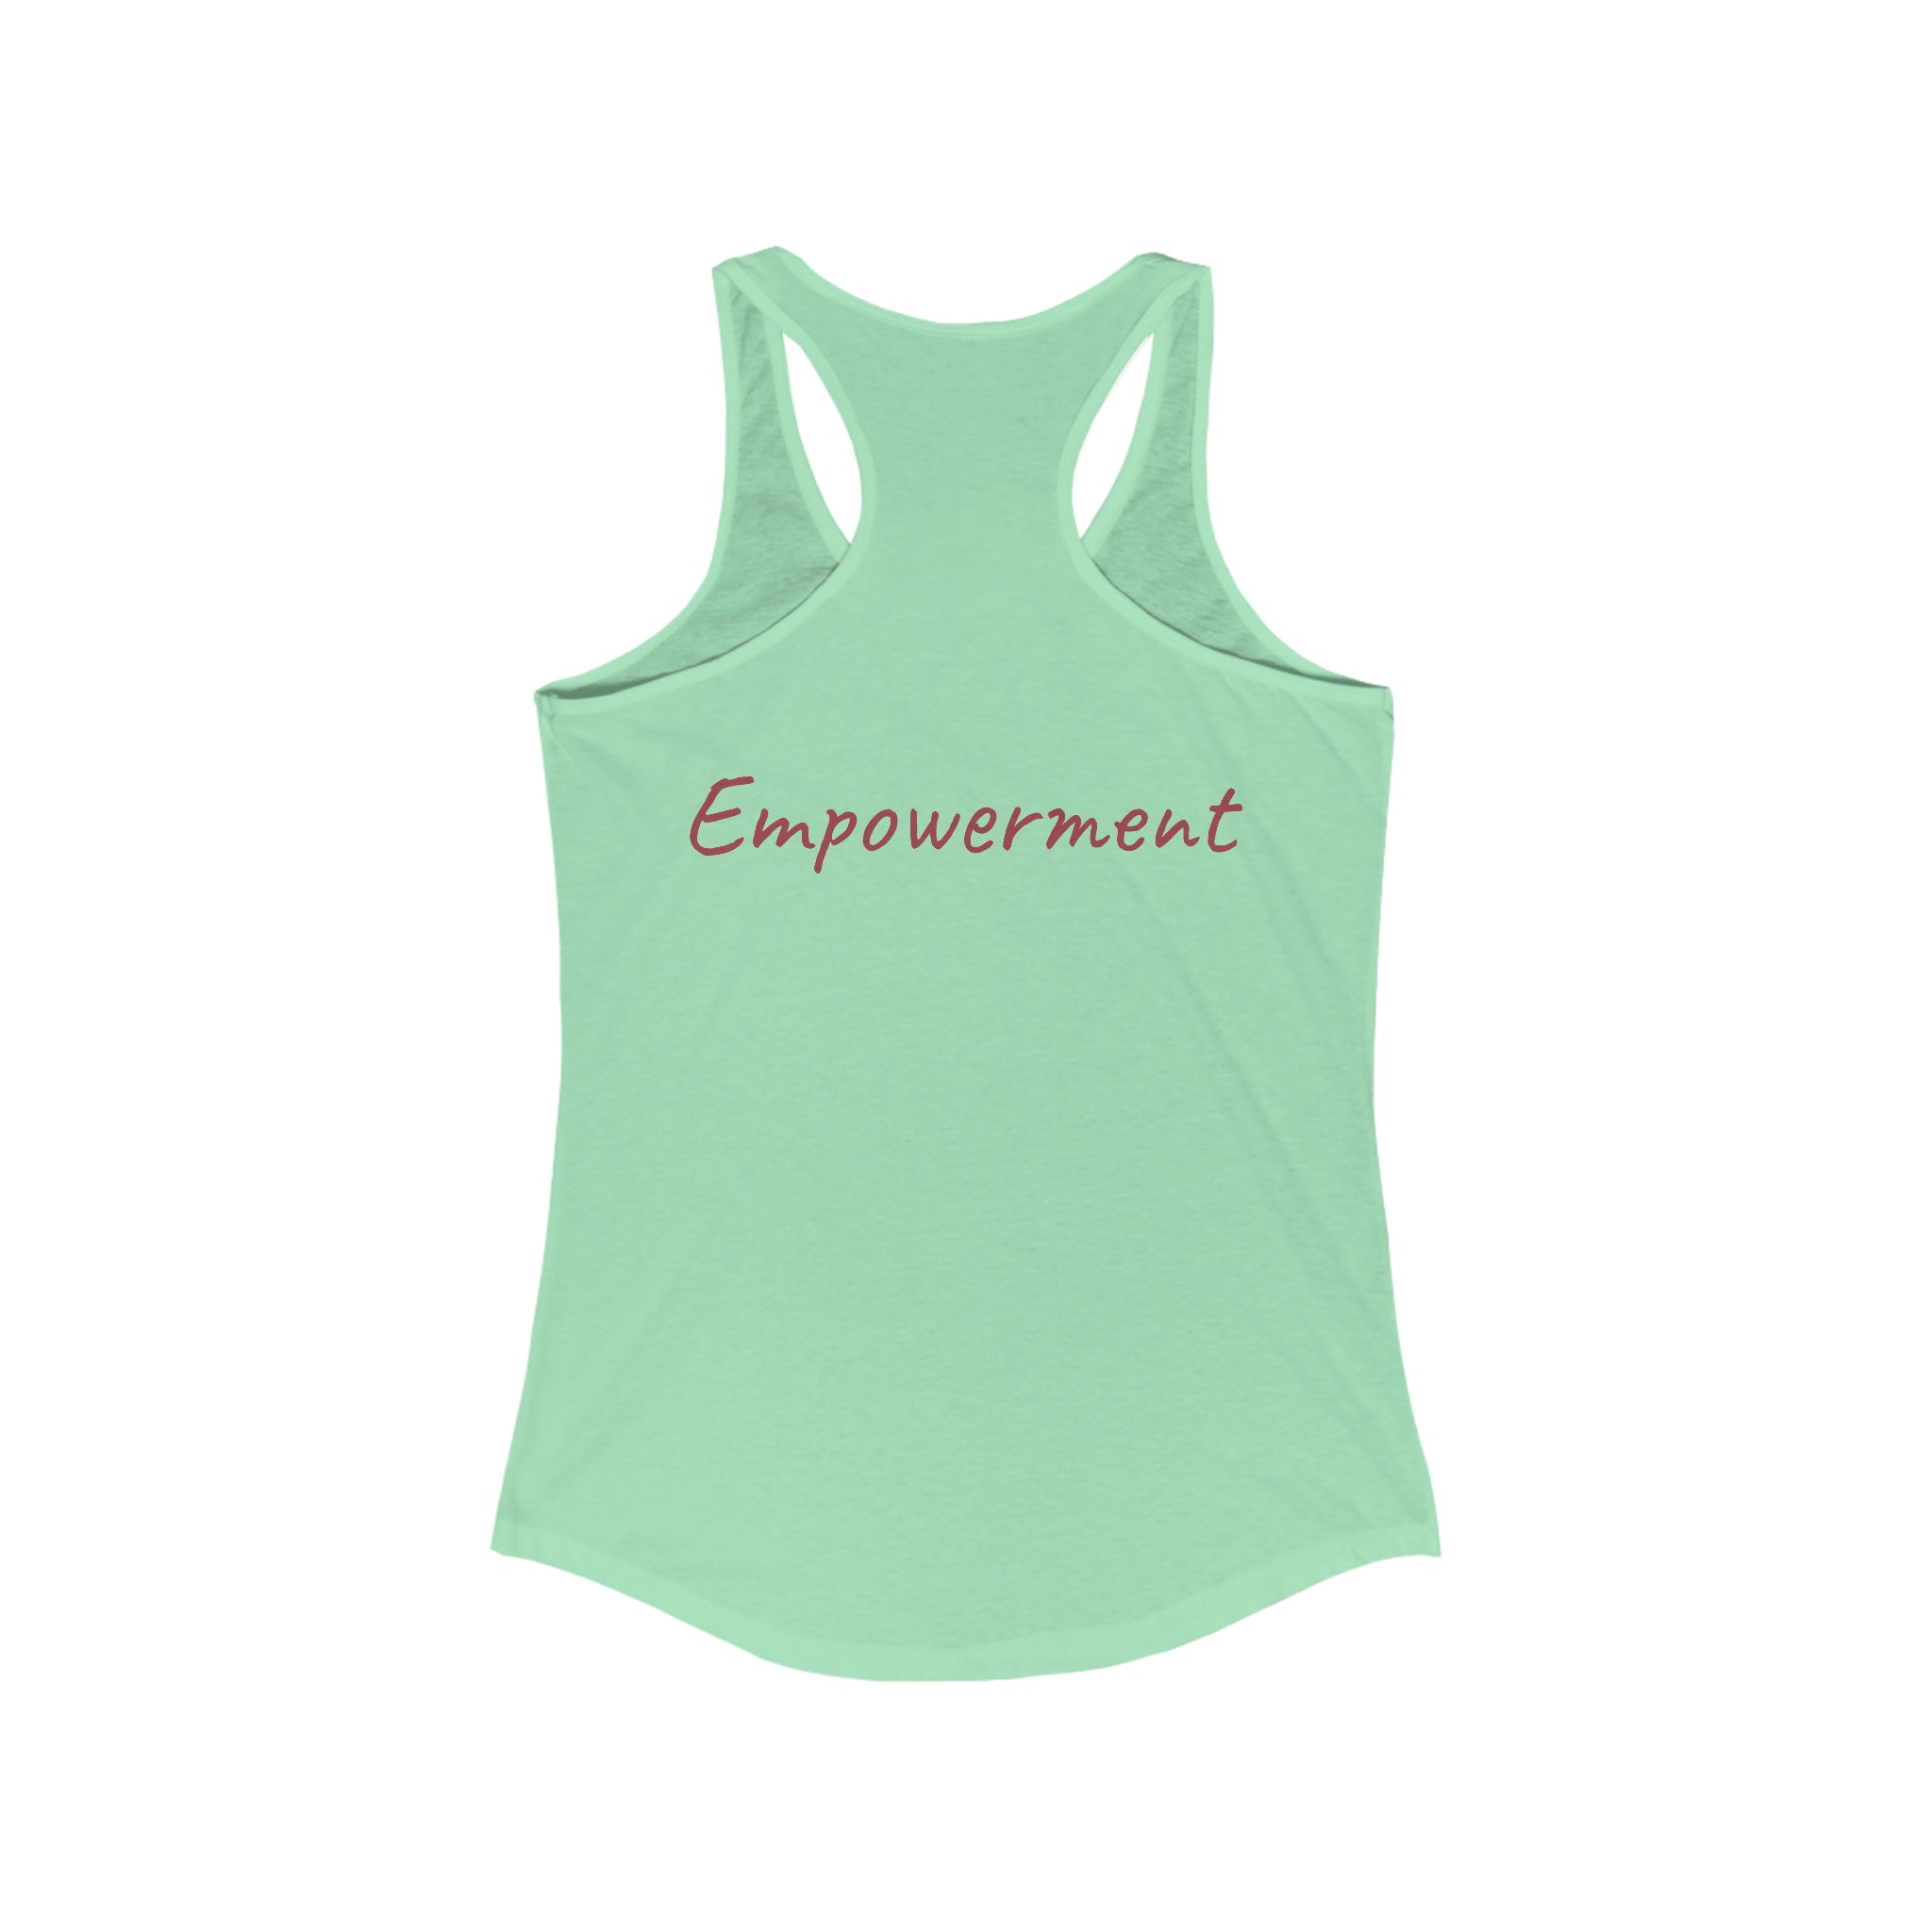 Empowerment Racerback: Fashion meets advocacy Solid Mint Activewear Athletic Tank Gym Clothes Performance Tank Racerback Sleeveless Top Sporty Apparel Tank Top Women's Tank Workout Gear Yoga Tank Tank Top 4708032993004285017_2048_602b1f14-cc1d-4a34-973a-deb4d3cfed8f Printify